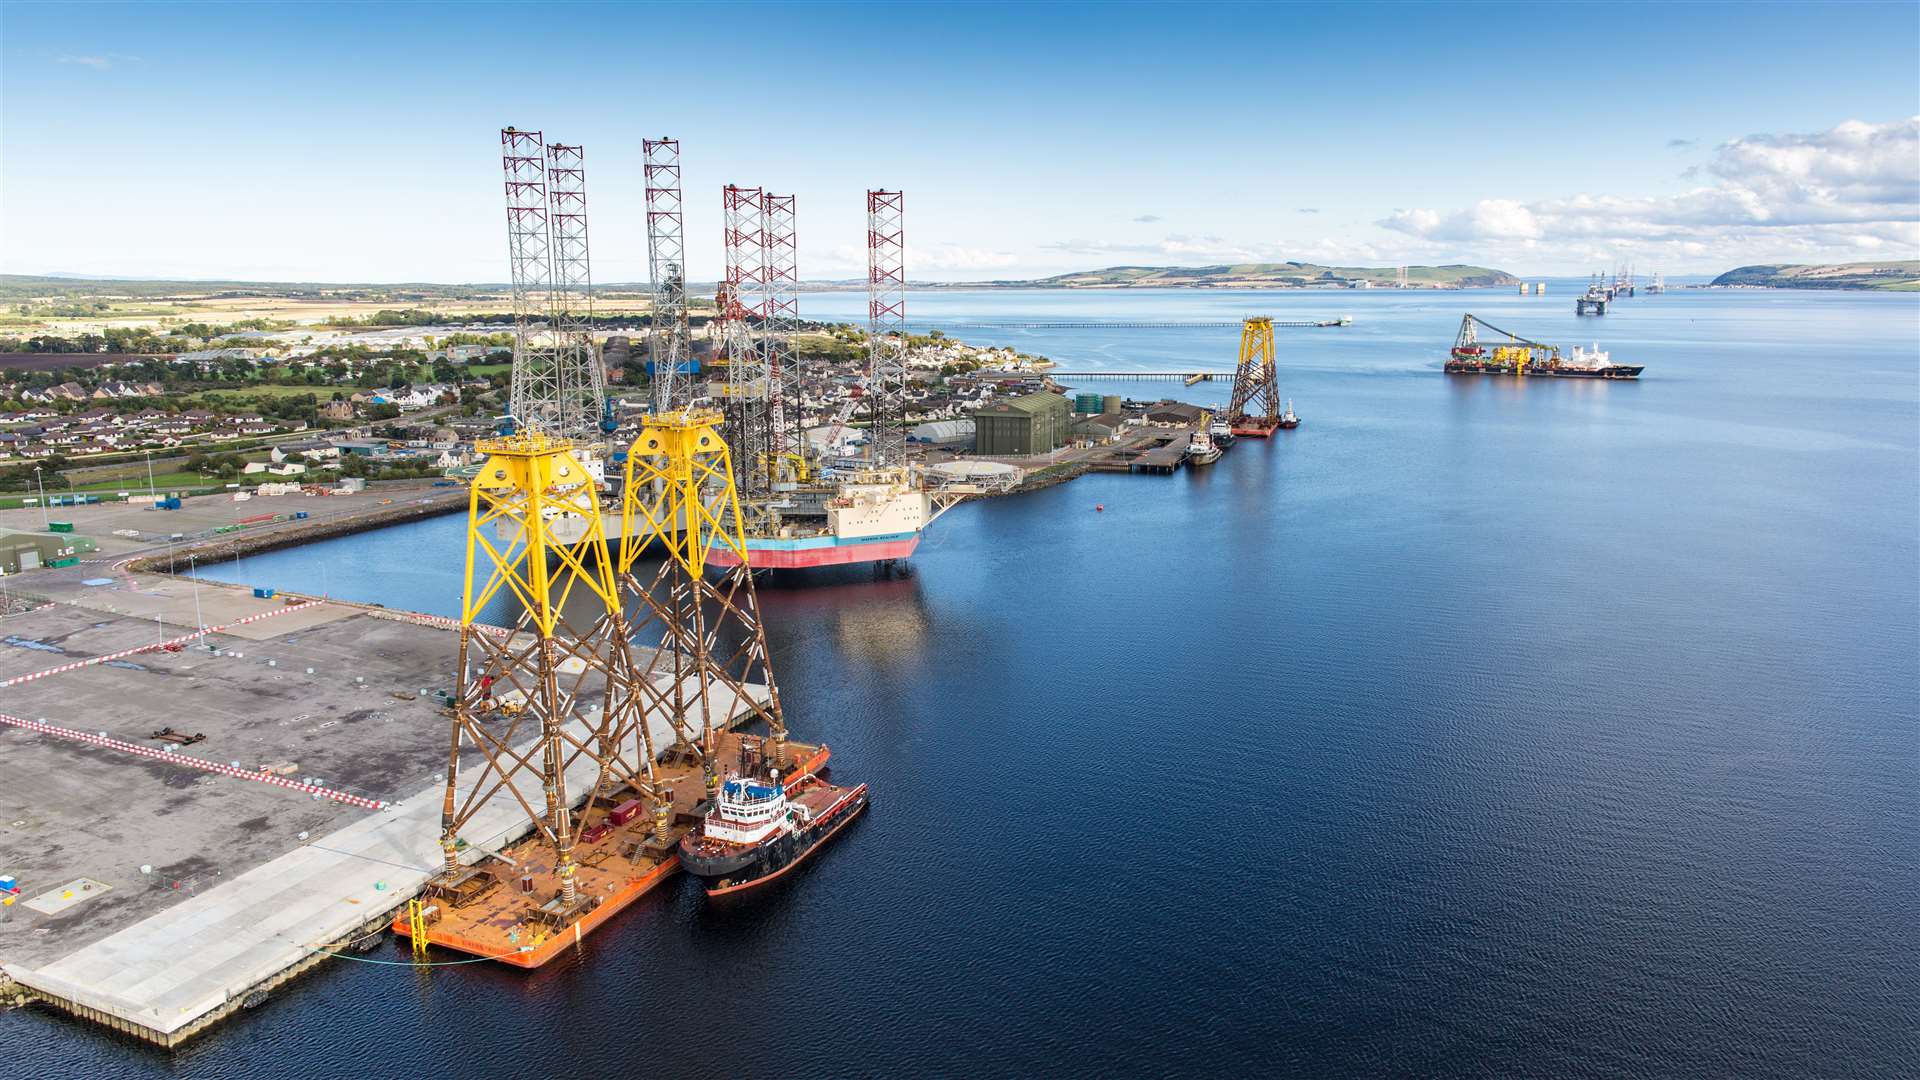 The Cromarty Firth is well placed to take advantage of new greenport opportunities, according to PoCF chief executive Bob Buskie.